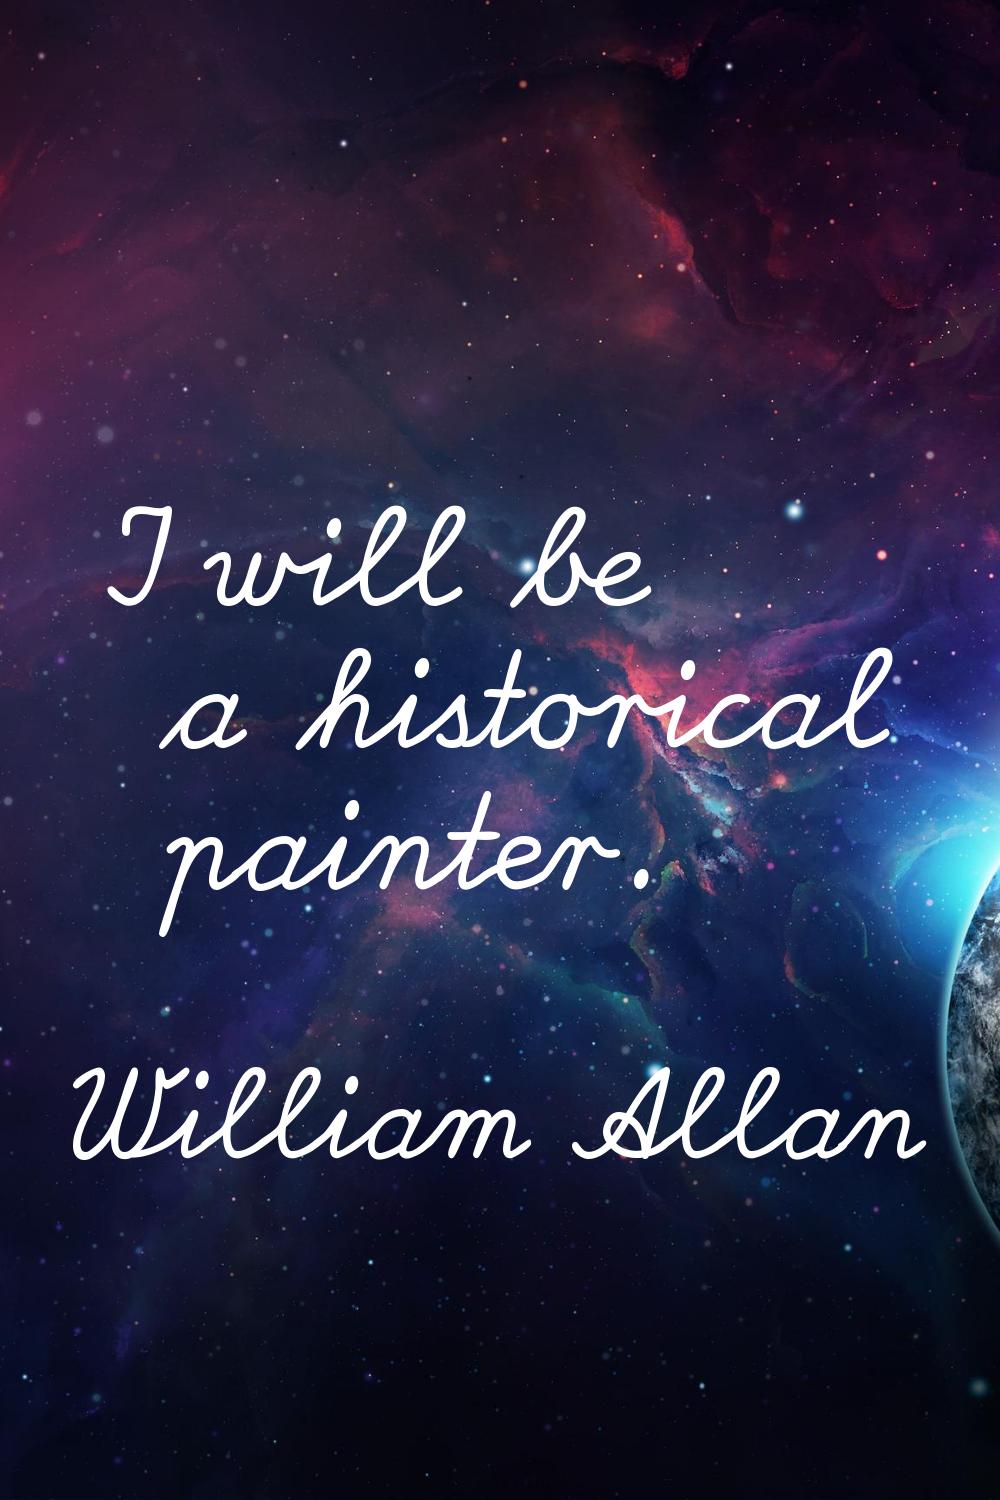 I will be a historical painter.